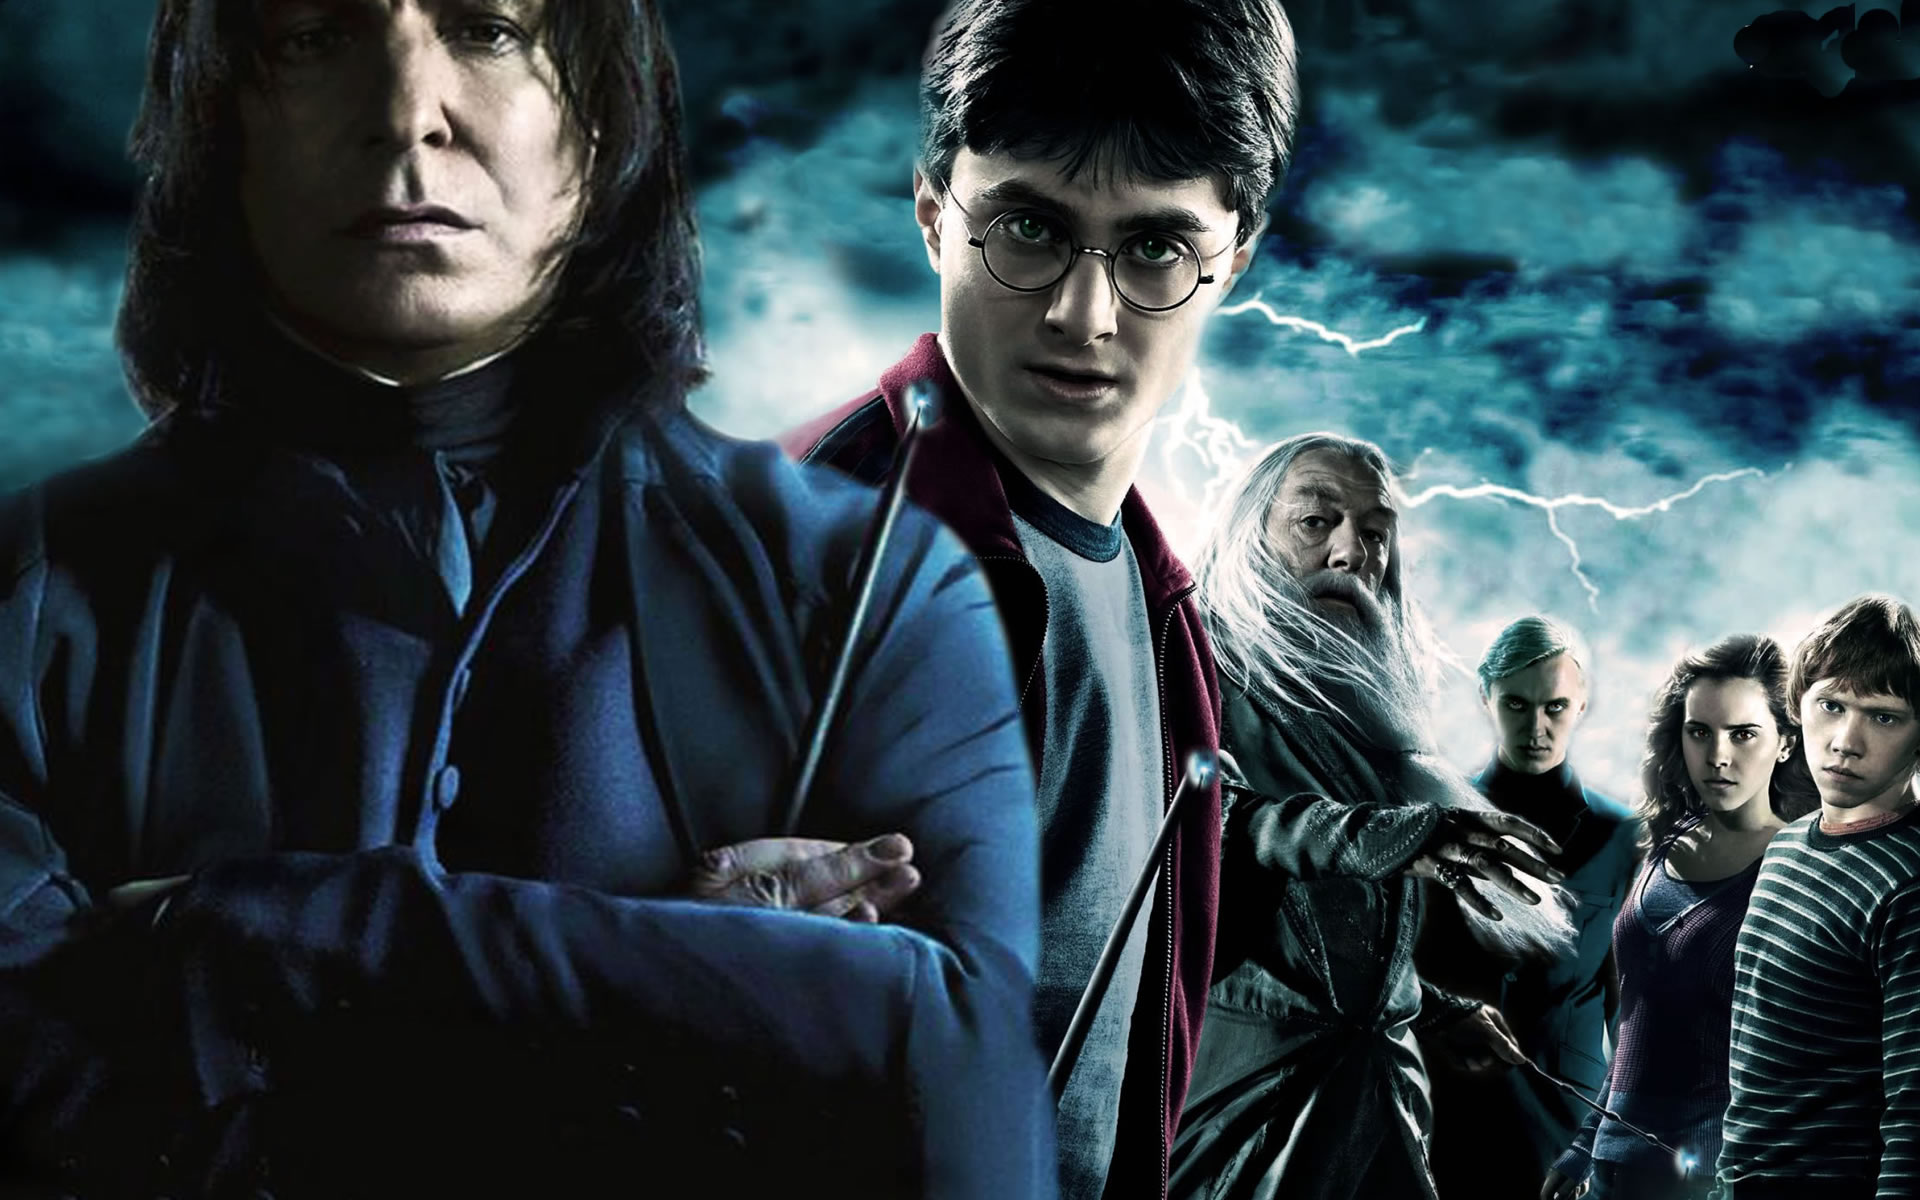 J.K. Rowling Giving Fans 12 New Harry Potter Stories for Christmas